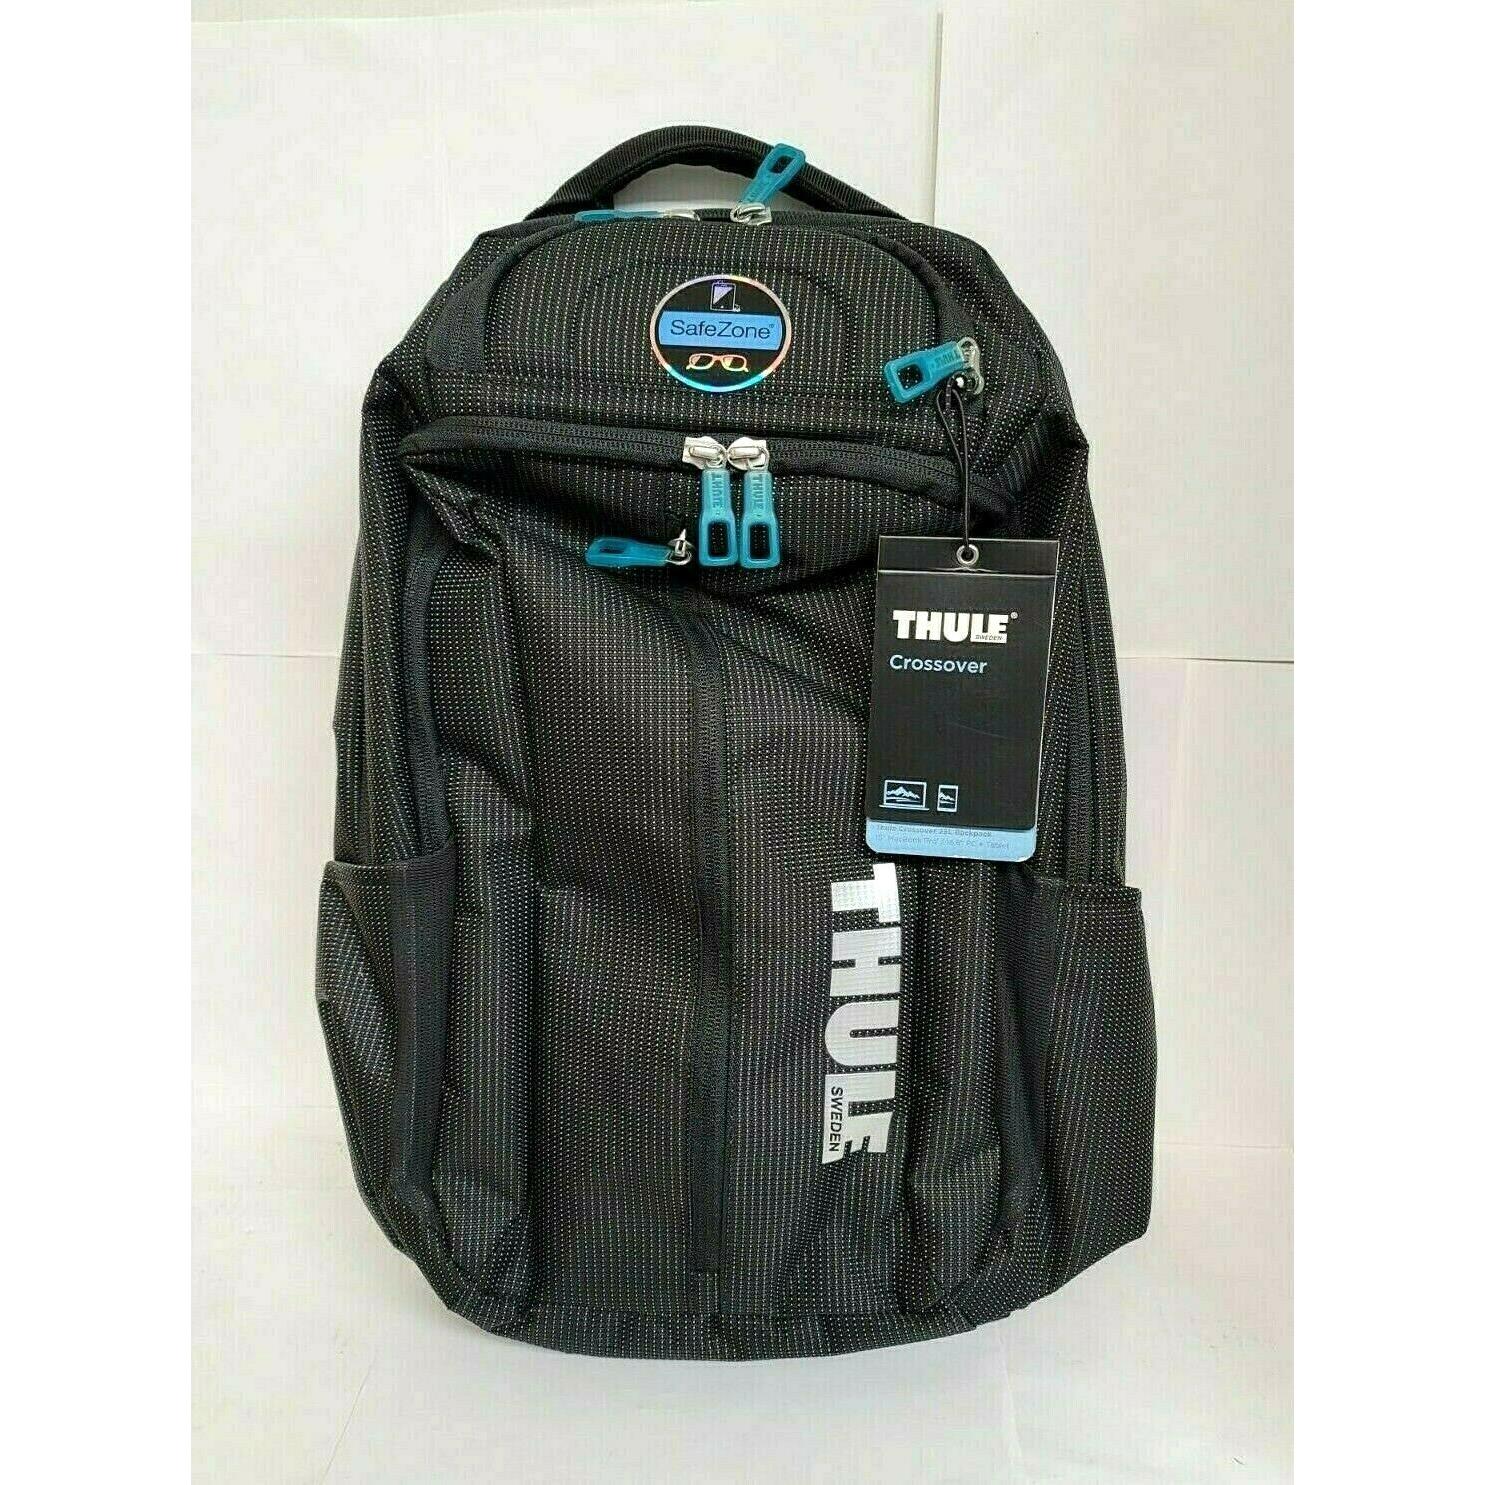 Thule Crossover Backpack Bag 25L TCBP-317 Black Holds Unto 15 Inch Laptop